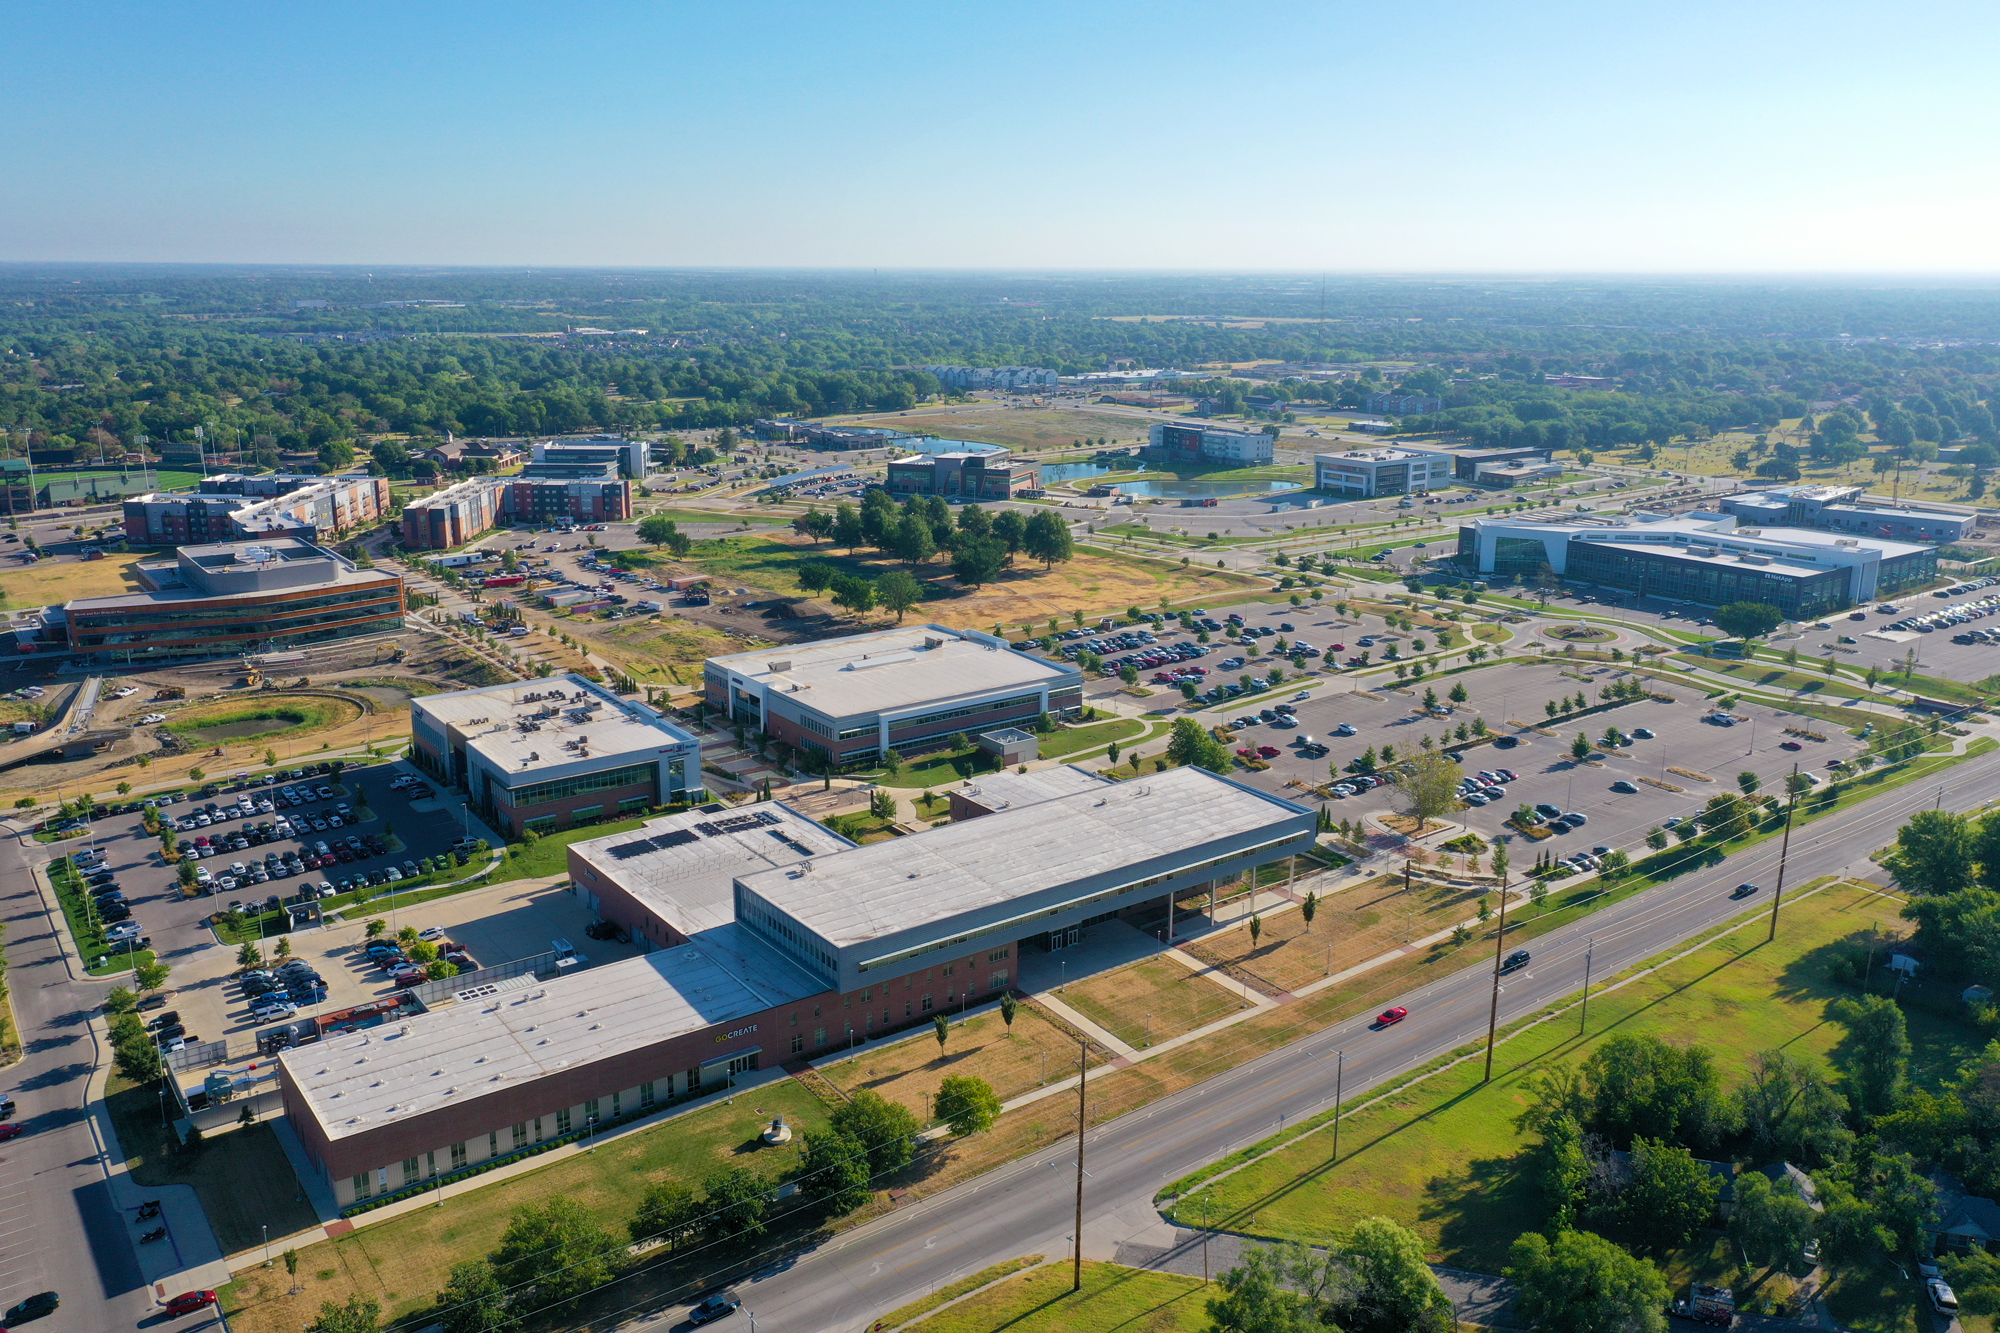 Aerial view of Innovation campus